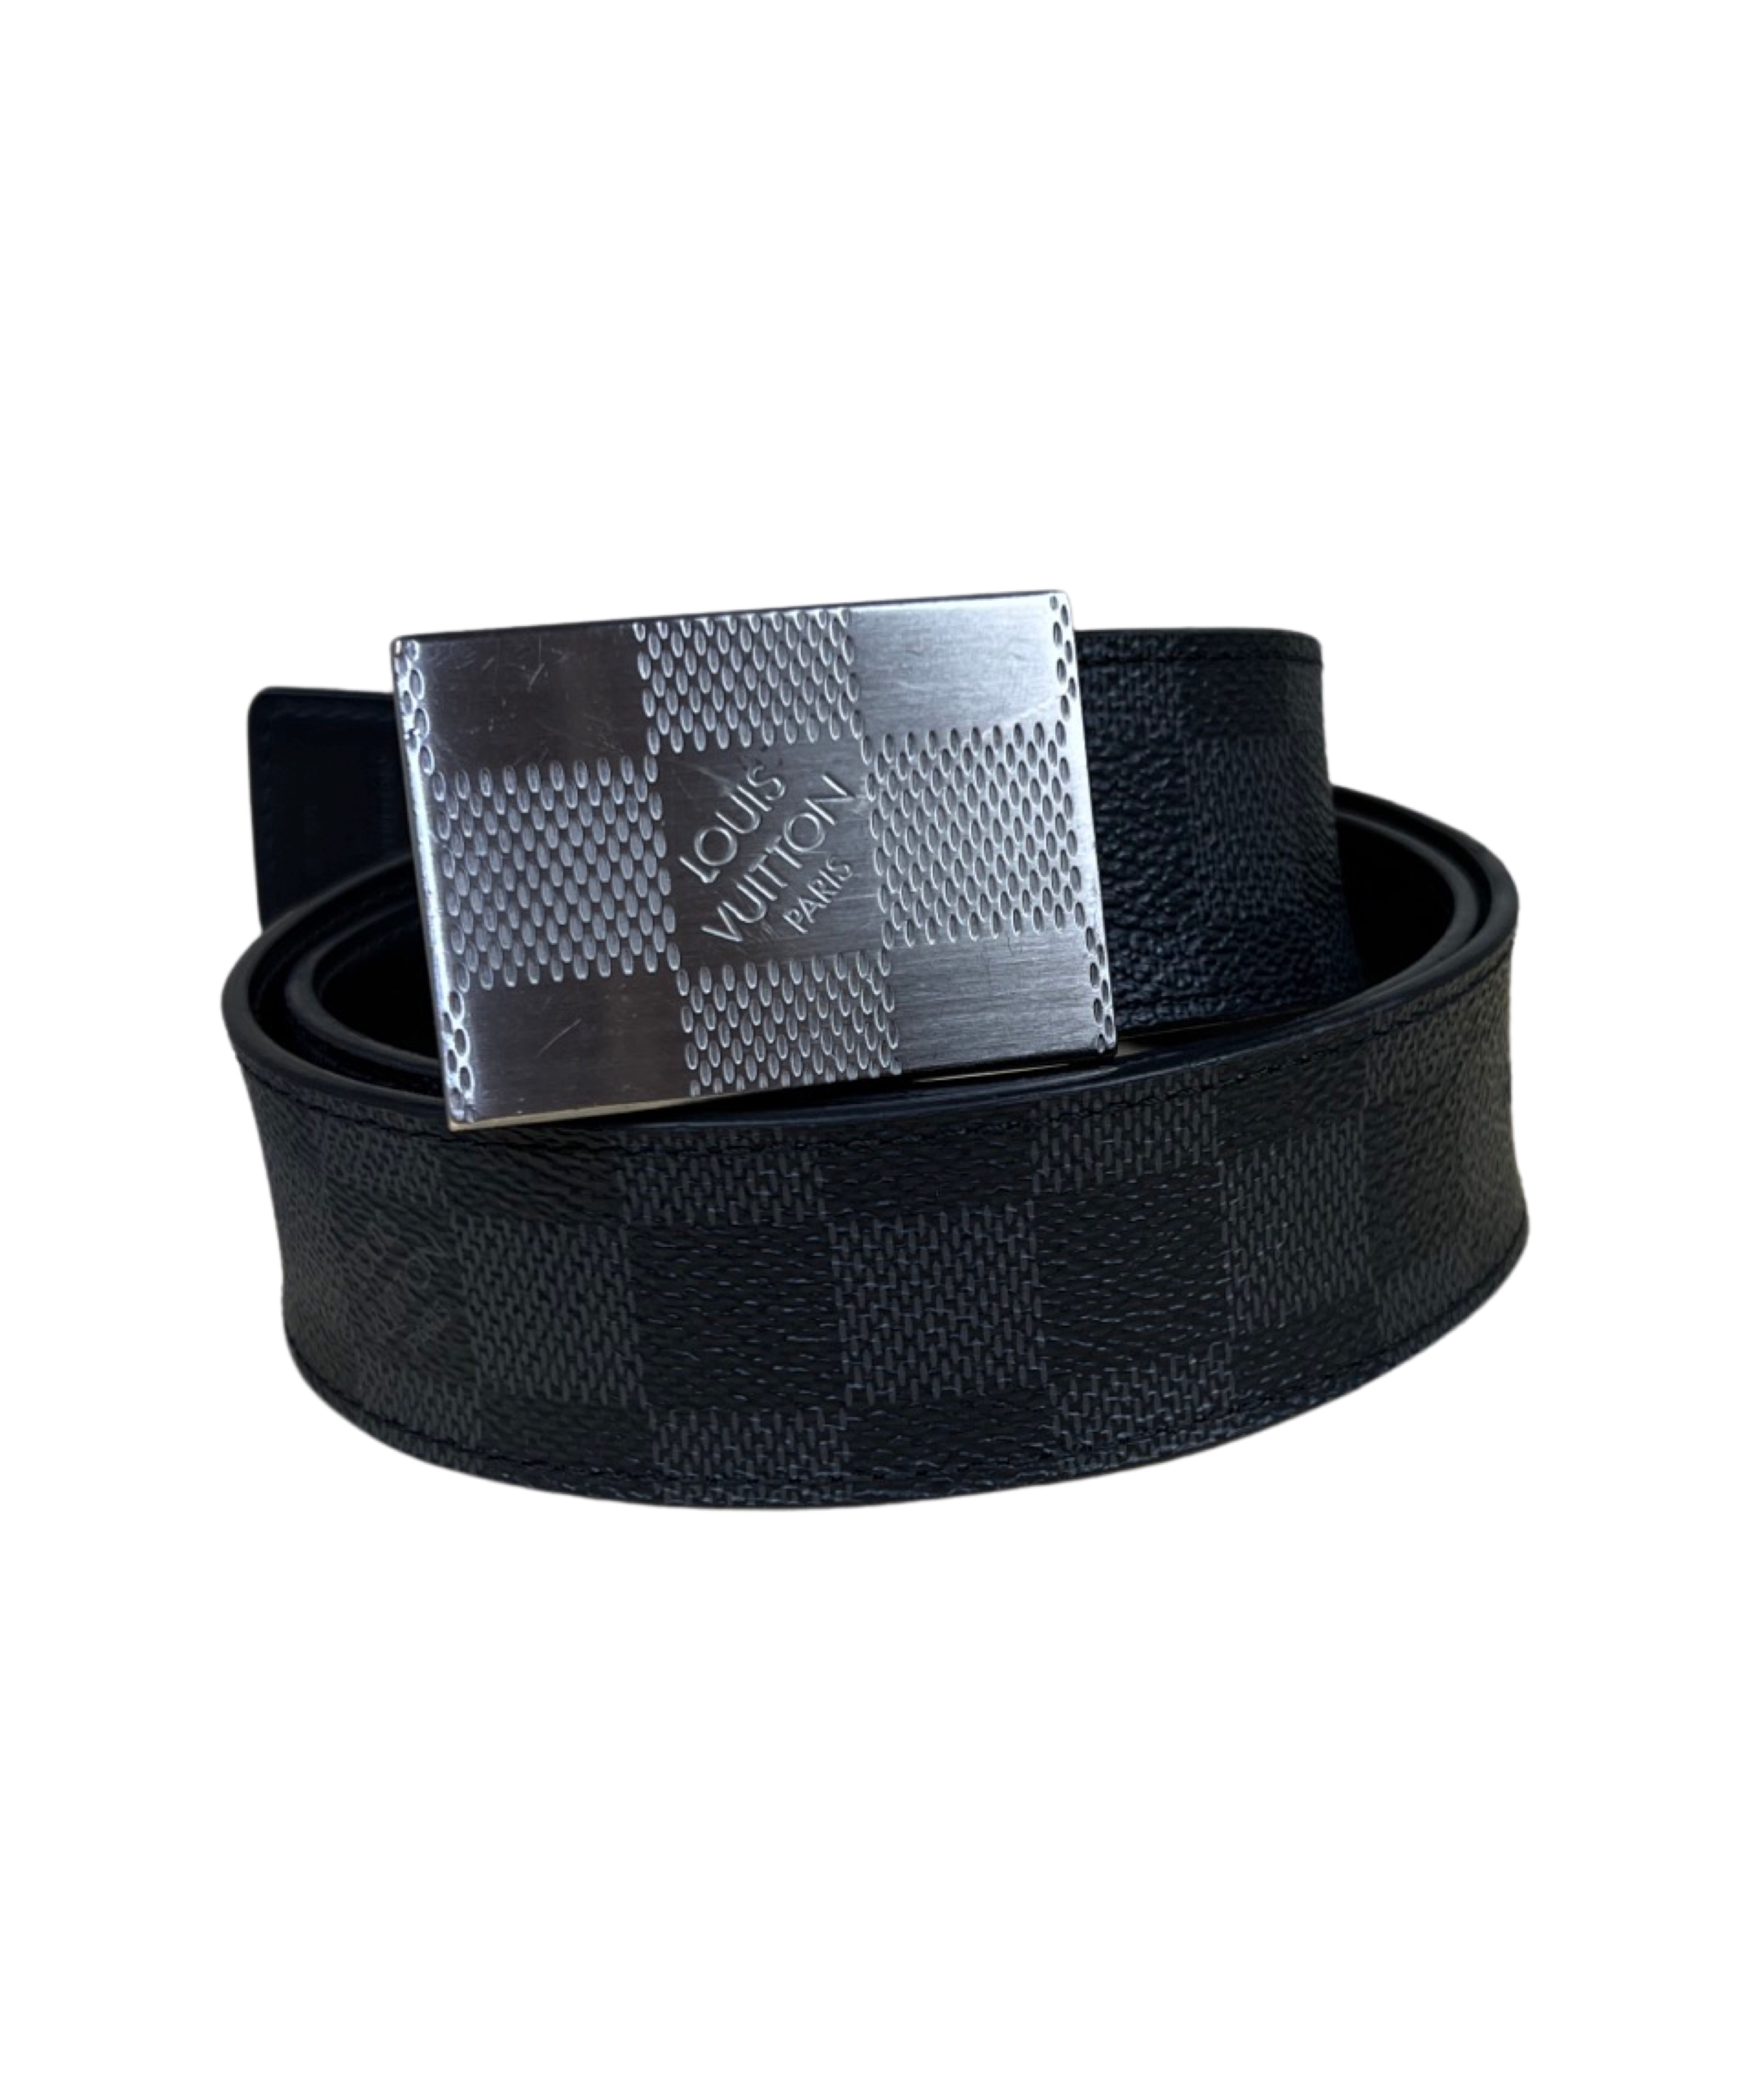 Pre-owned Louis Vuitton Damier Graphite Reversible Belt Size 85 In Grey